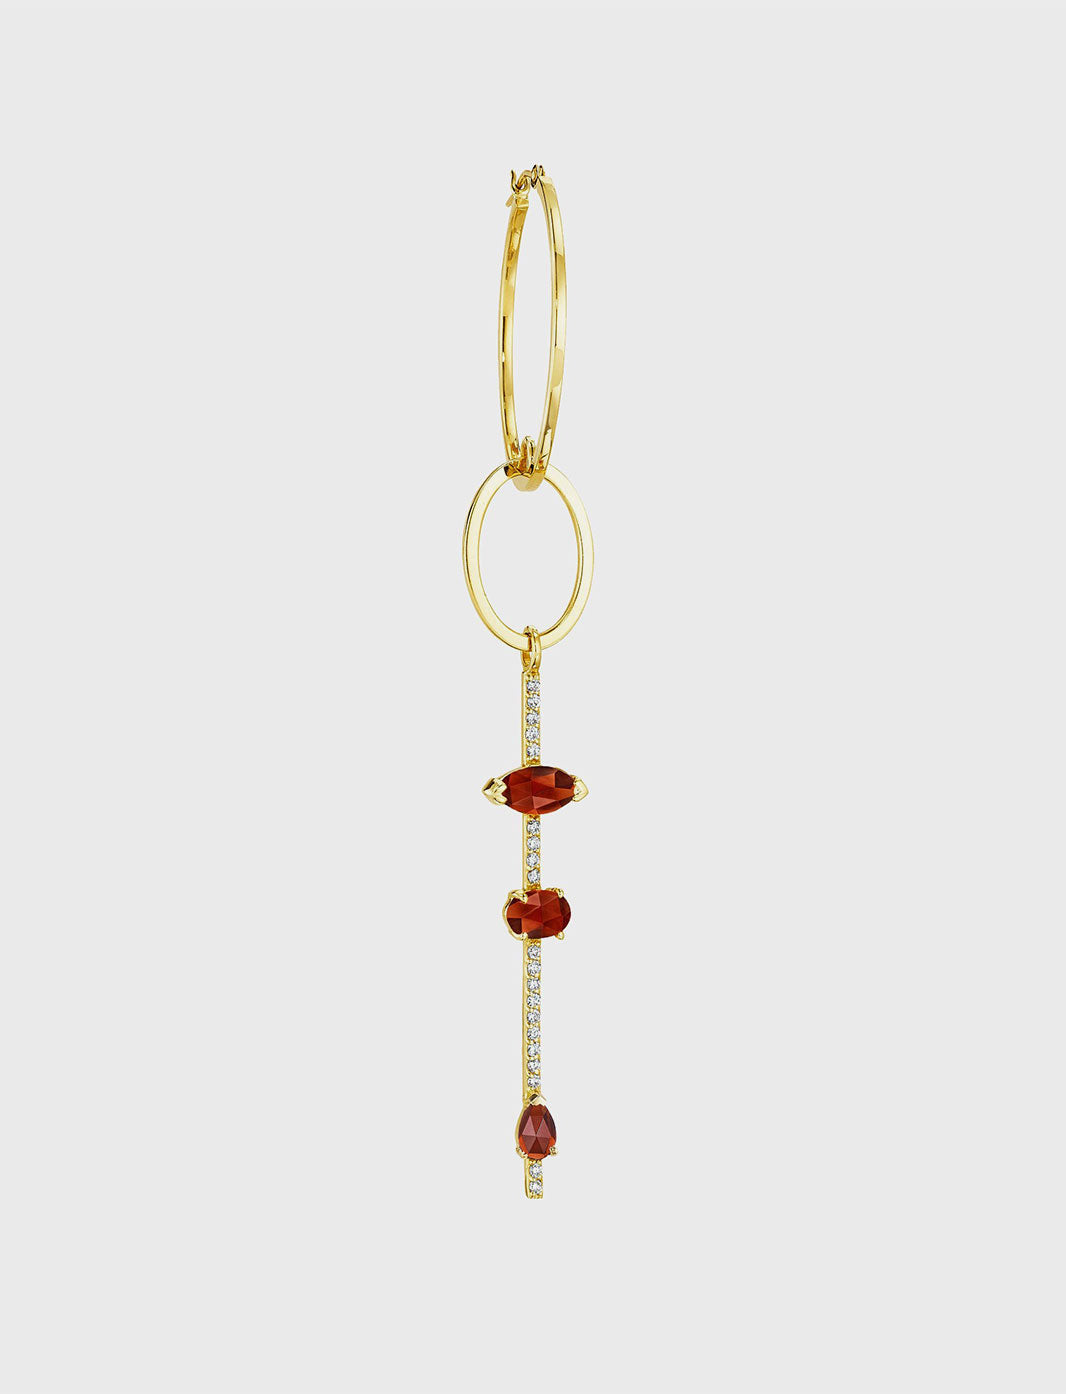 Single Statement Earring with Diamond Pave Bar and Gemstone Details